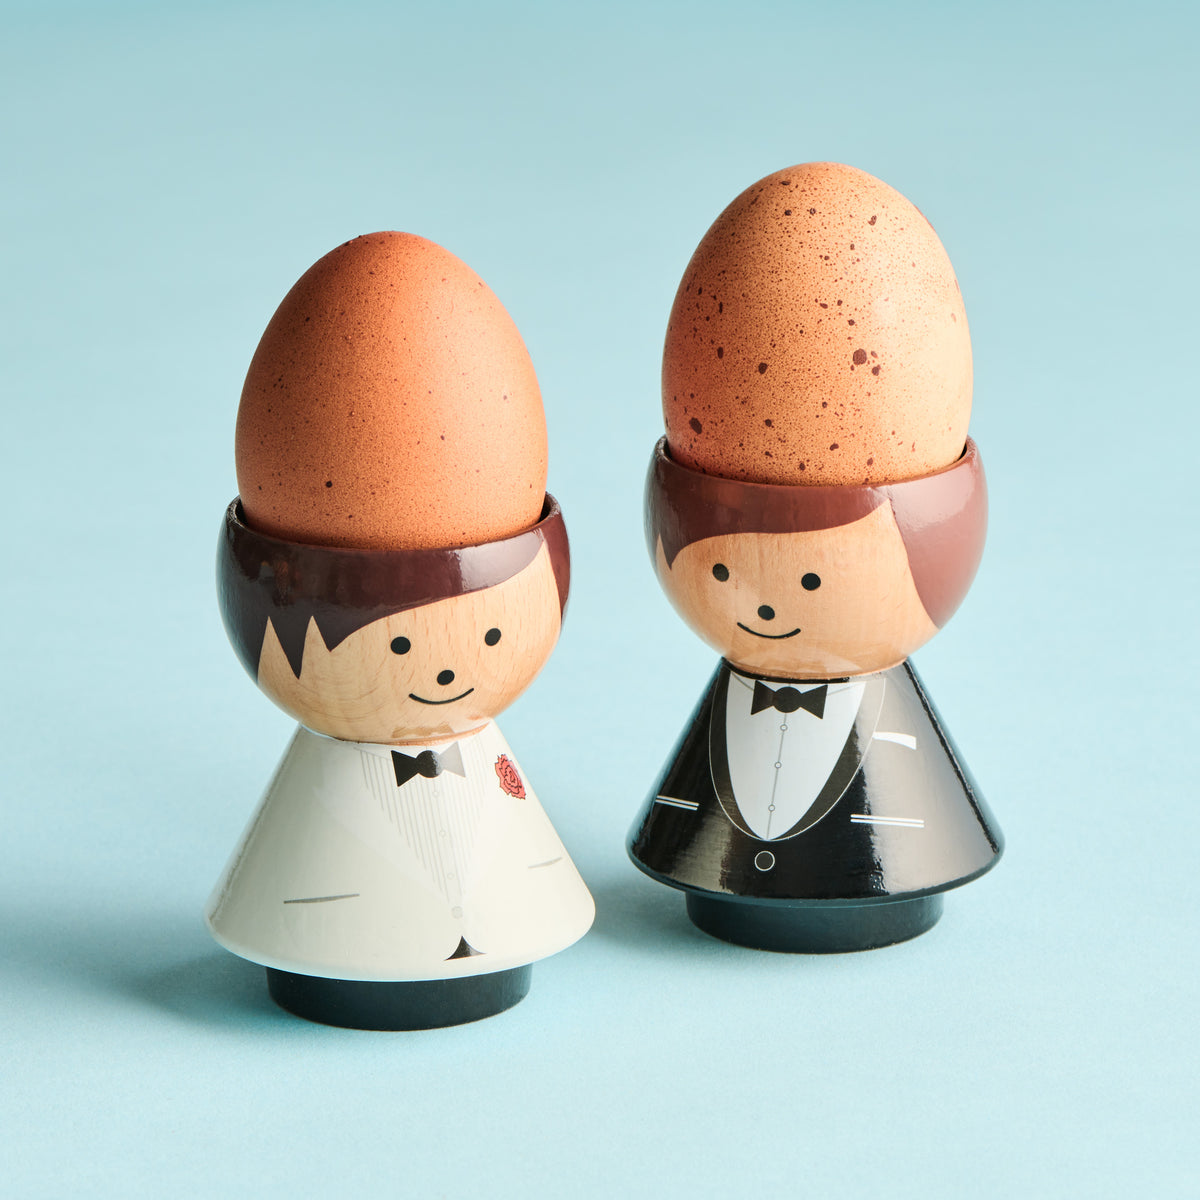 The James Egg Cup - White Dinner Jacket Edition